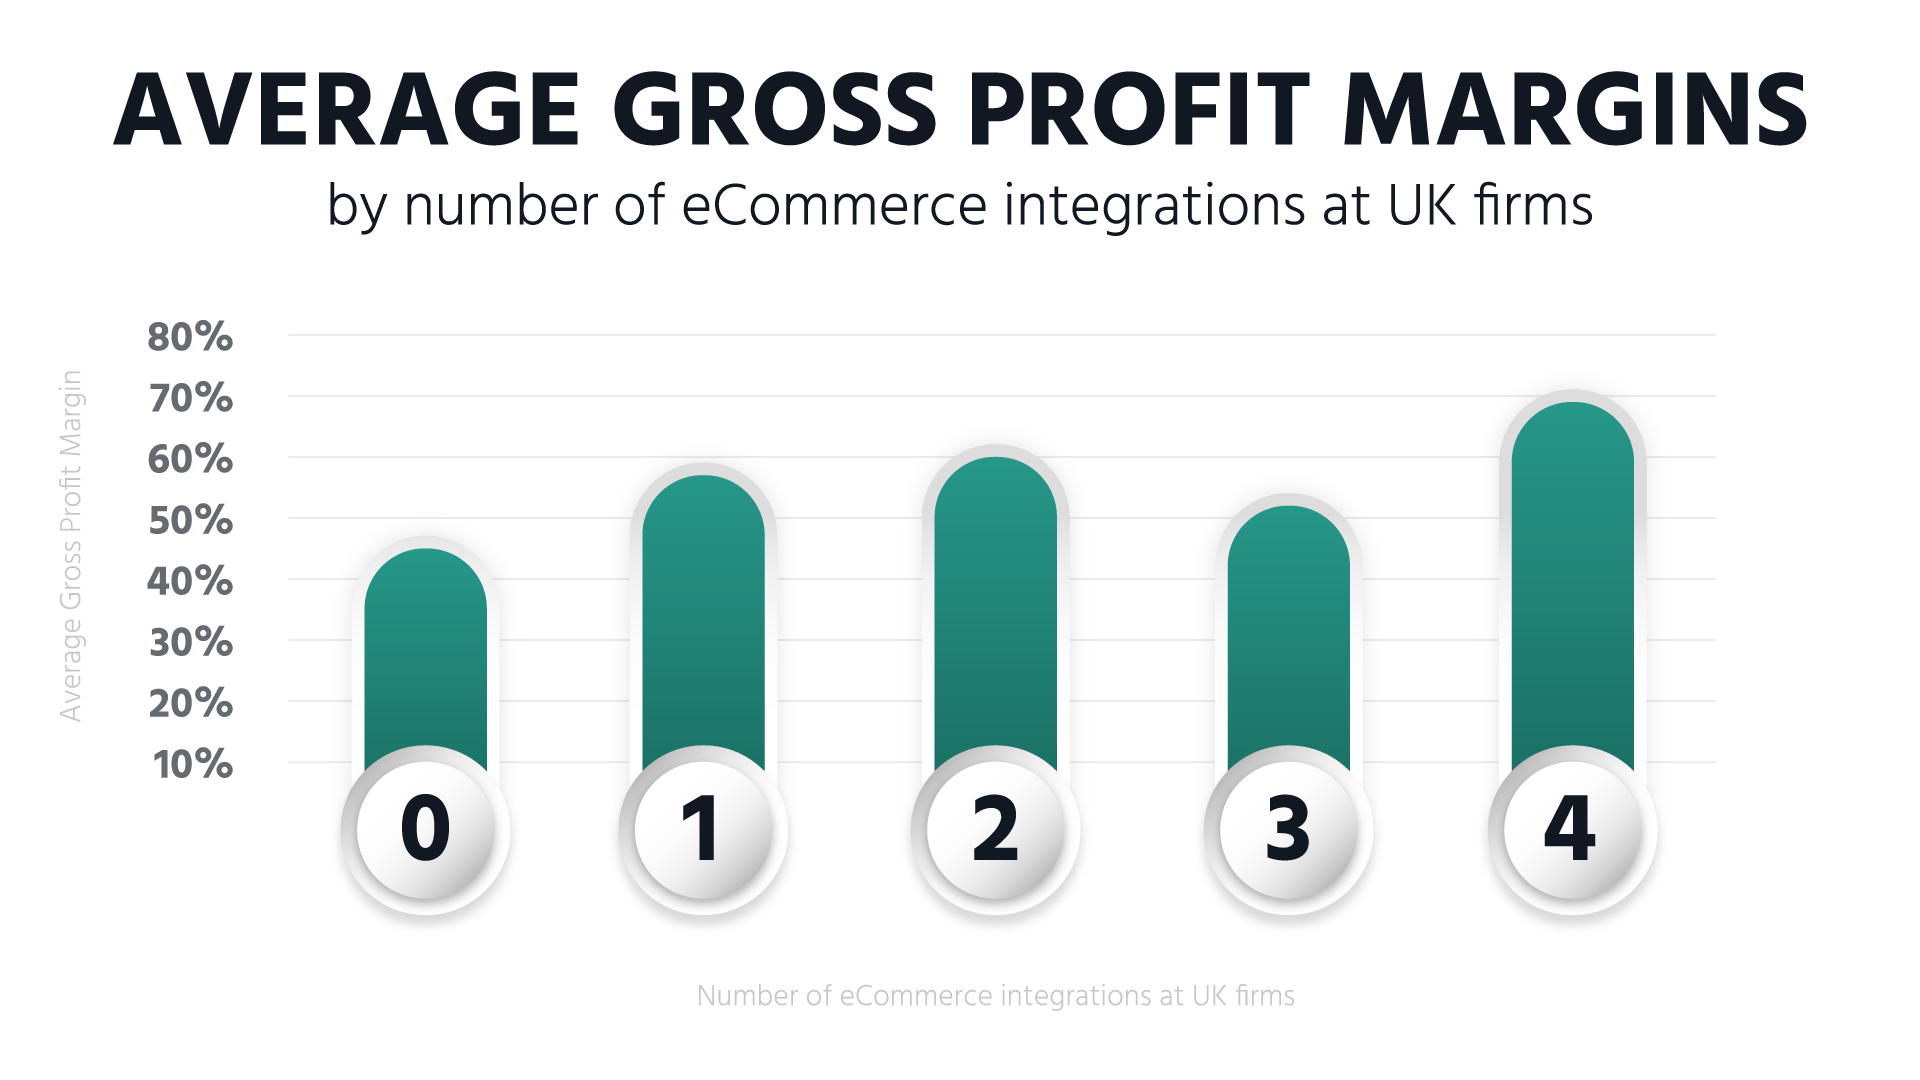 Profit-Margins-By-Number-of-eCommerce-Integrations